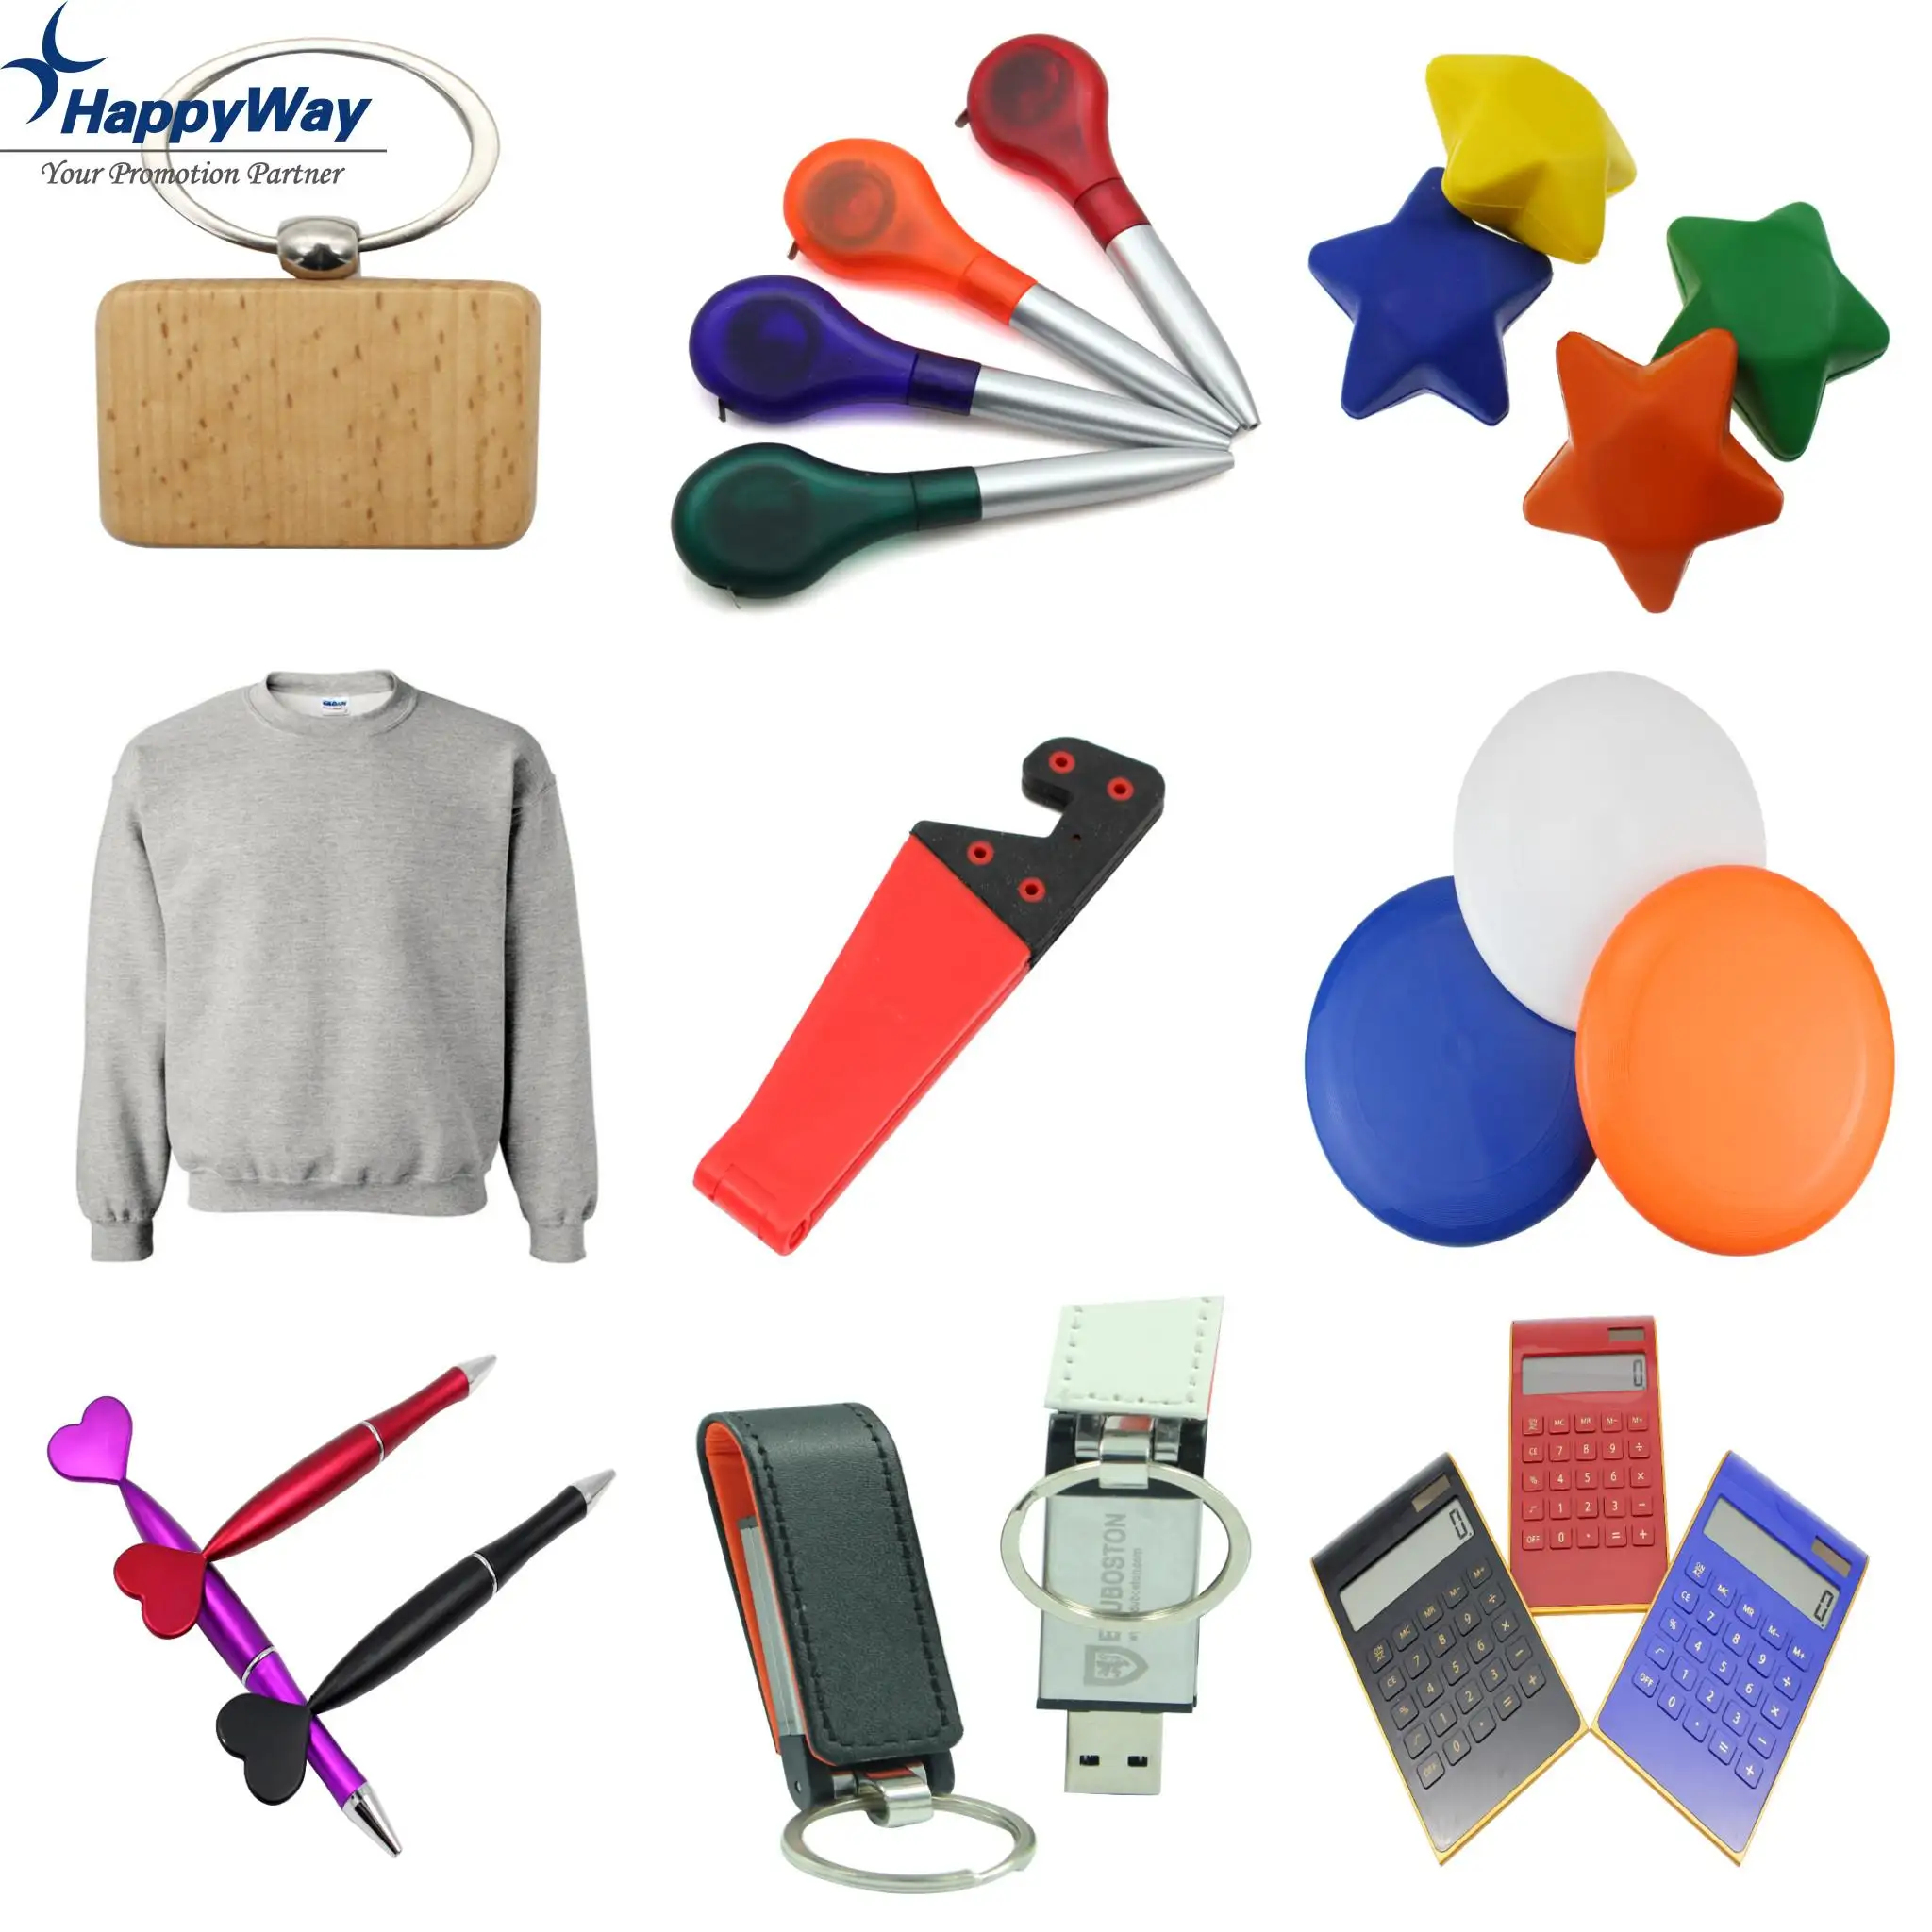 Newest Promotional Items Gadgets Innovative Products In Market Promotional Items With Logo Printing